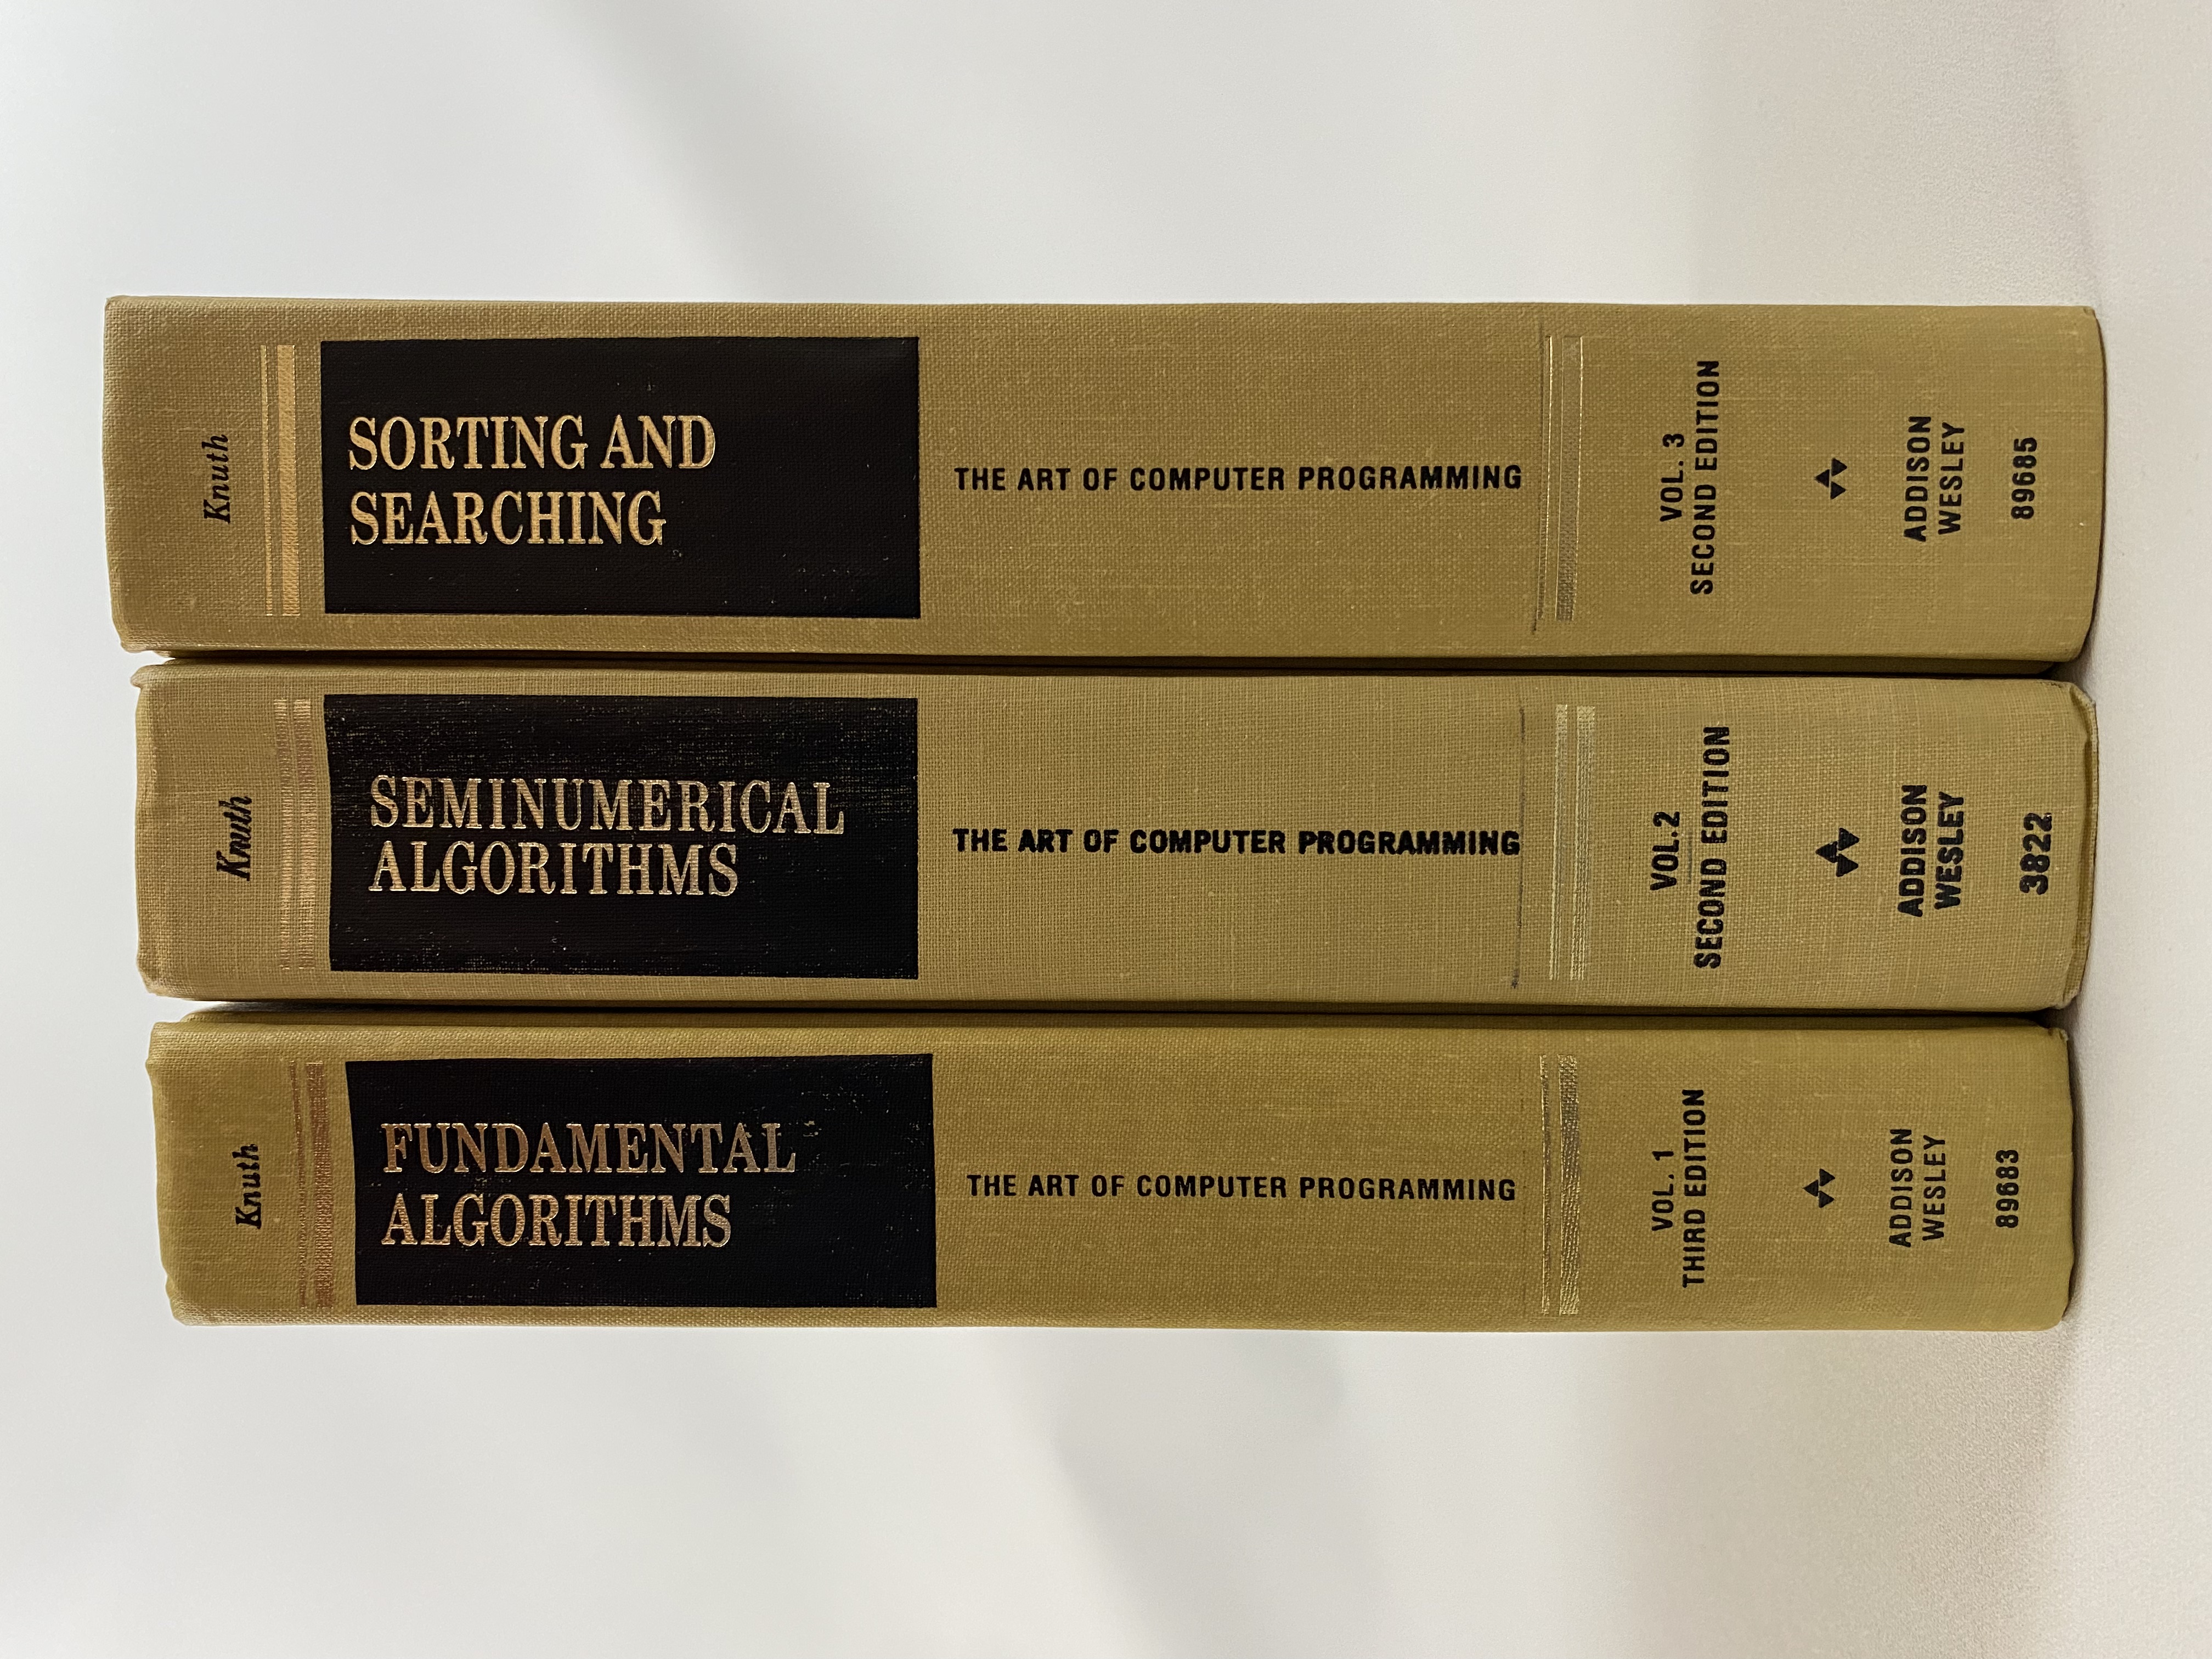 The Art of Computer Programming, 3 Volumes: 1. Fundamental Algorithms (3rd edition); 2. Seminumerical Algorithms (2nd edition); 3. Sorting and Searching (2nd edition) - Donald E Knuth